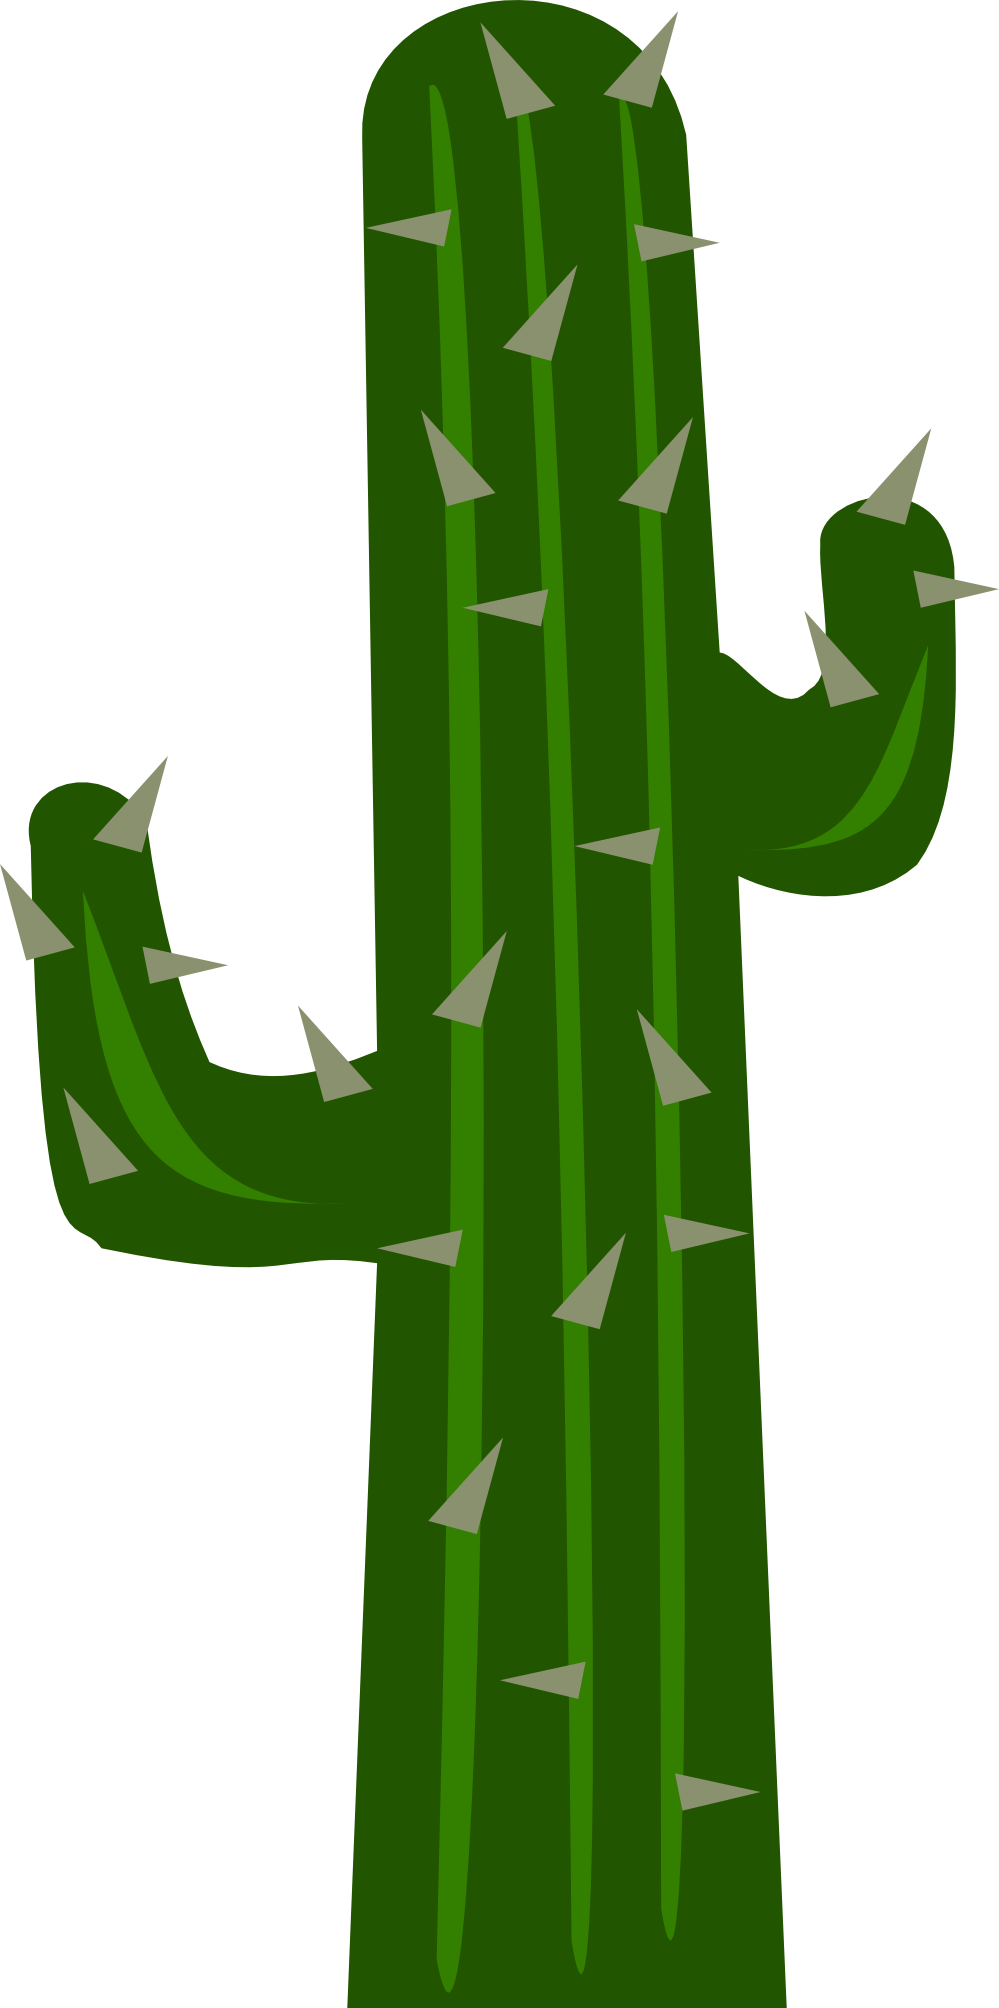 Gallery for cactus flower clipart 2 image #25259